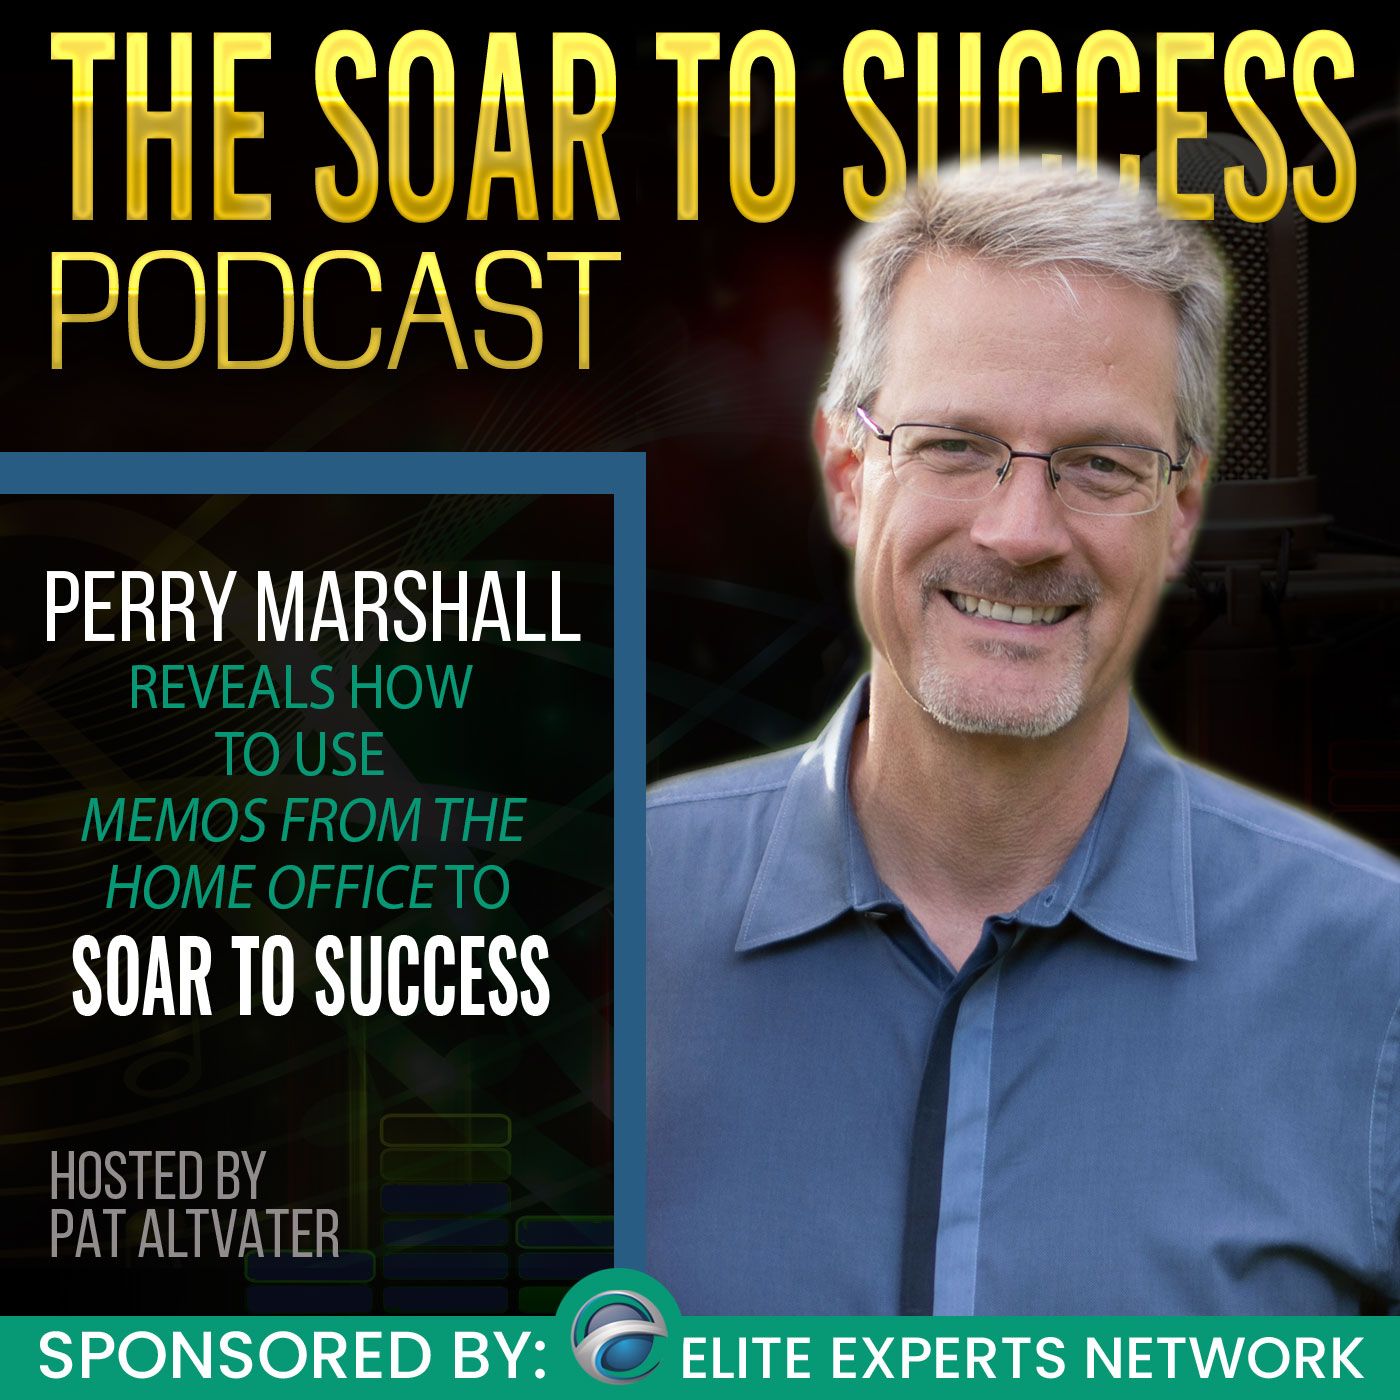 Perry Marshall Shares How ‘Memos From the Head Office’ Help Business Owners Soar to Success